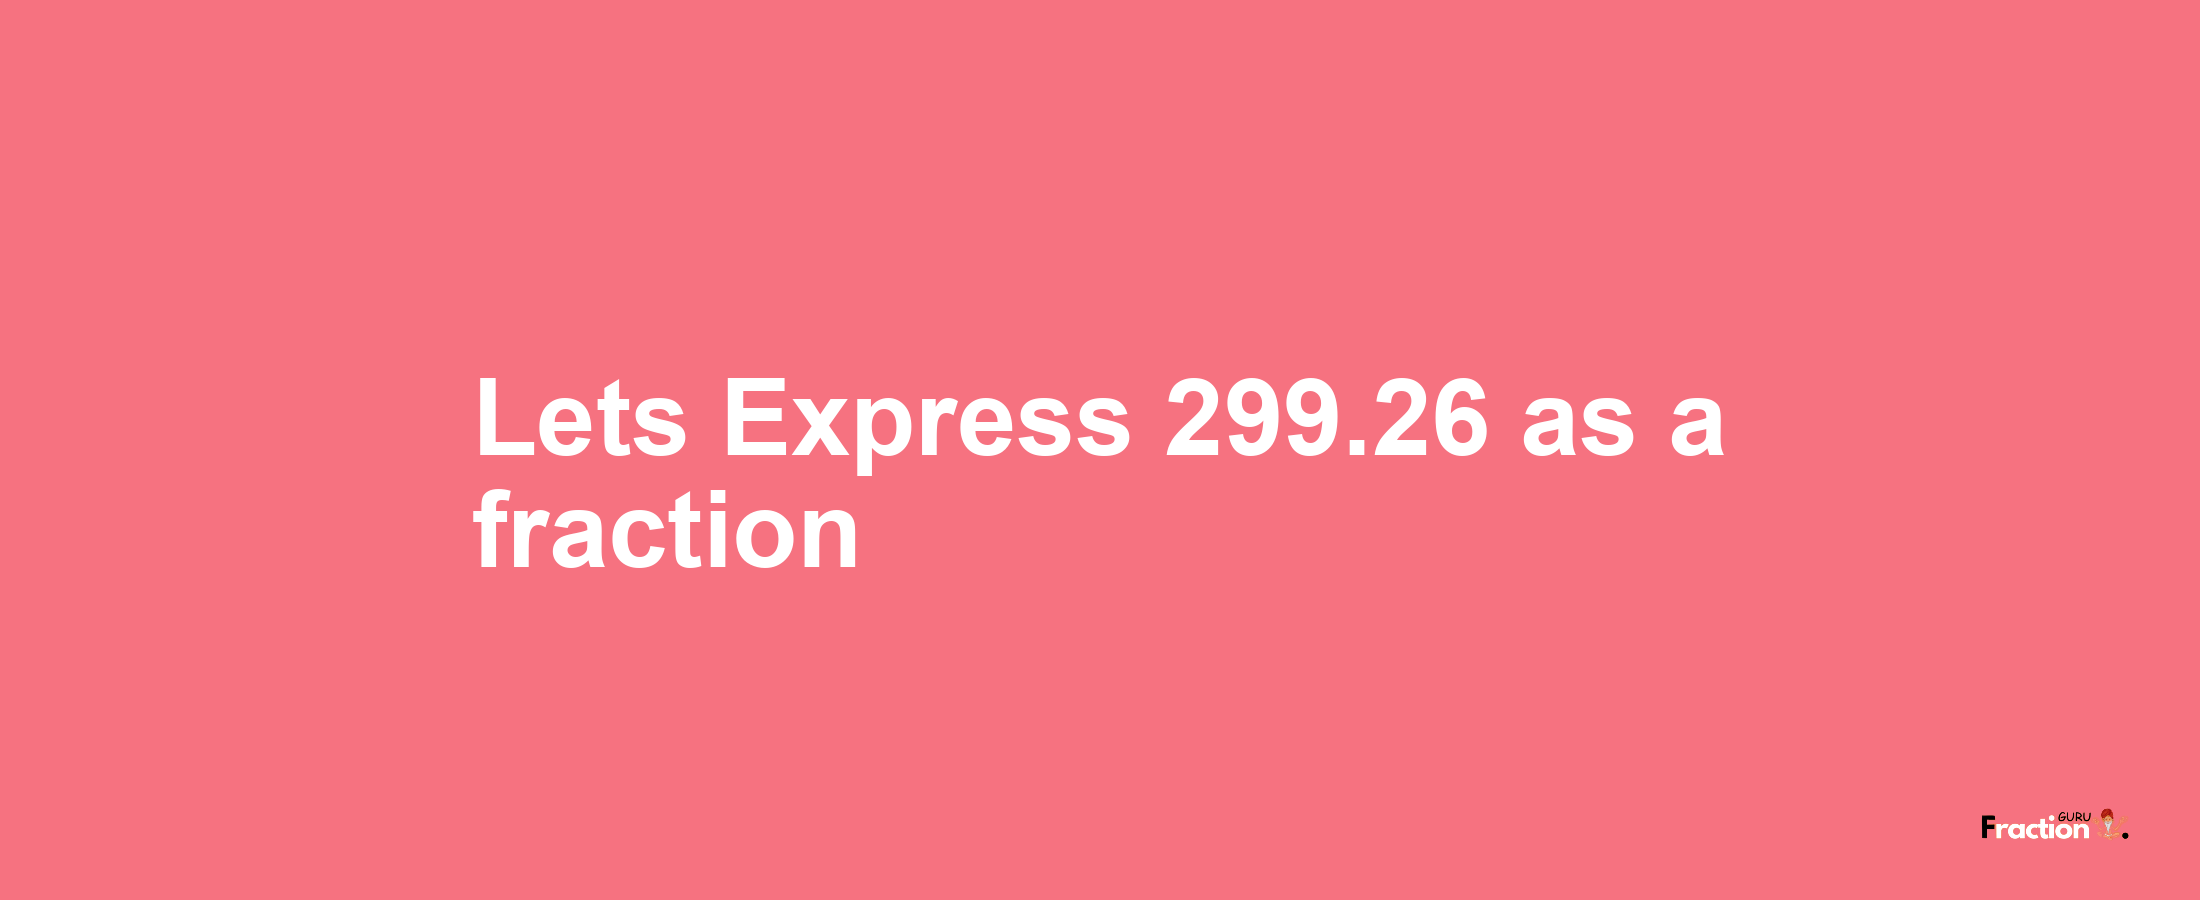 Lets Express 299.26 as afraction